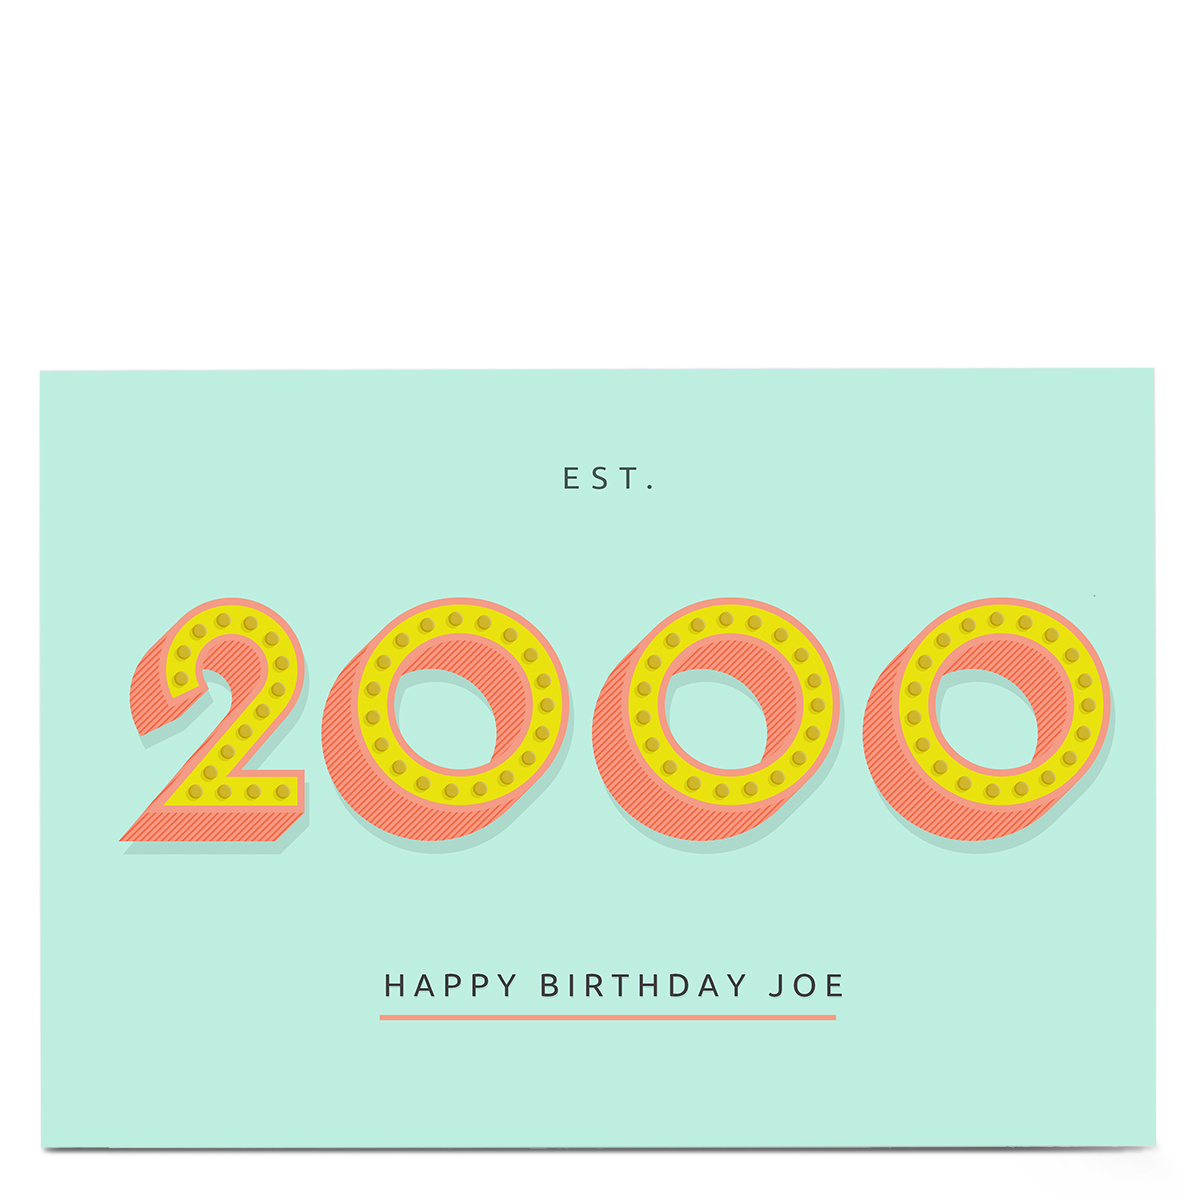 Personalised Birthday Card - Est. Any Date